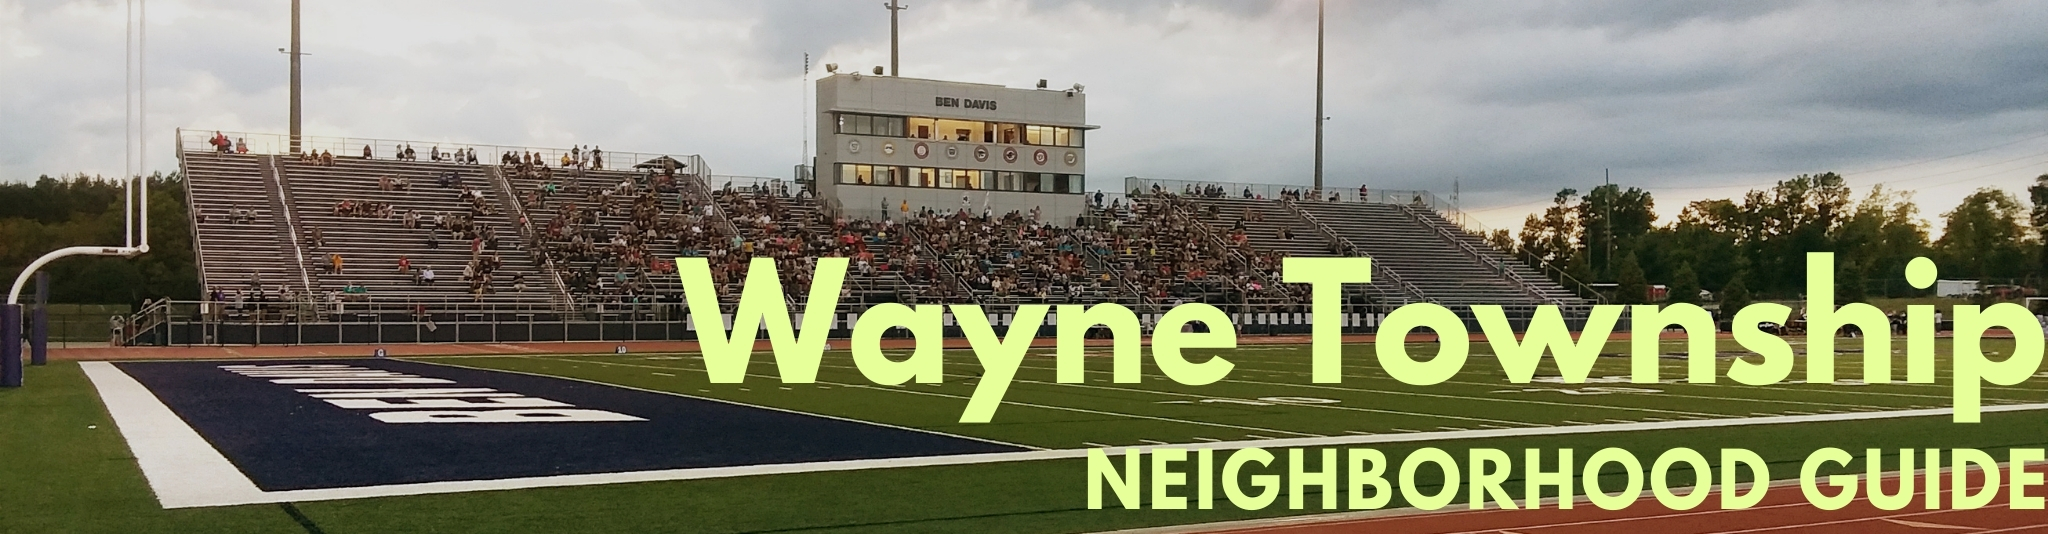 The Ben Davis Highschool is a common sight for anyone familiar with Wayne township on Indy's westside.